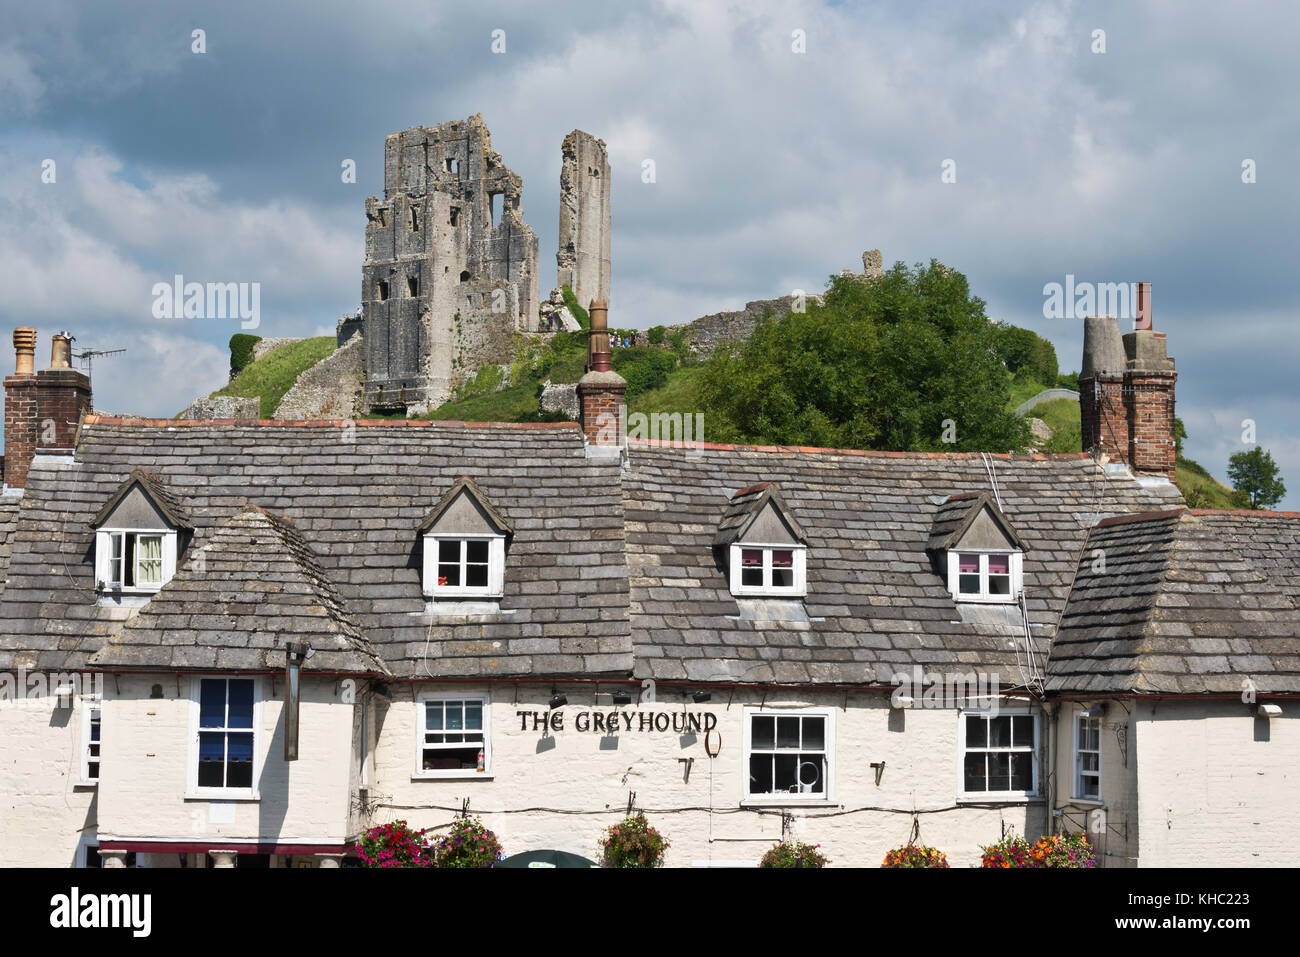 The ruins of Corfe Castle, Devon standing on the hill top overlooking the village of the same name with The Greyhound Public House in the foreground. Stock Photo